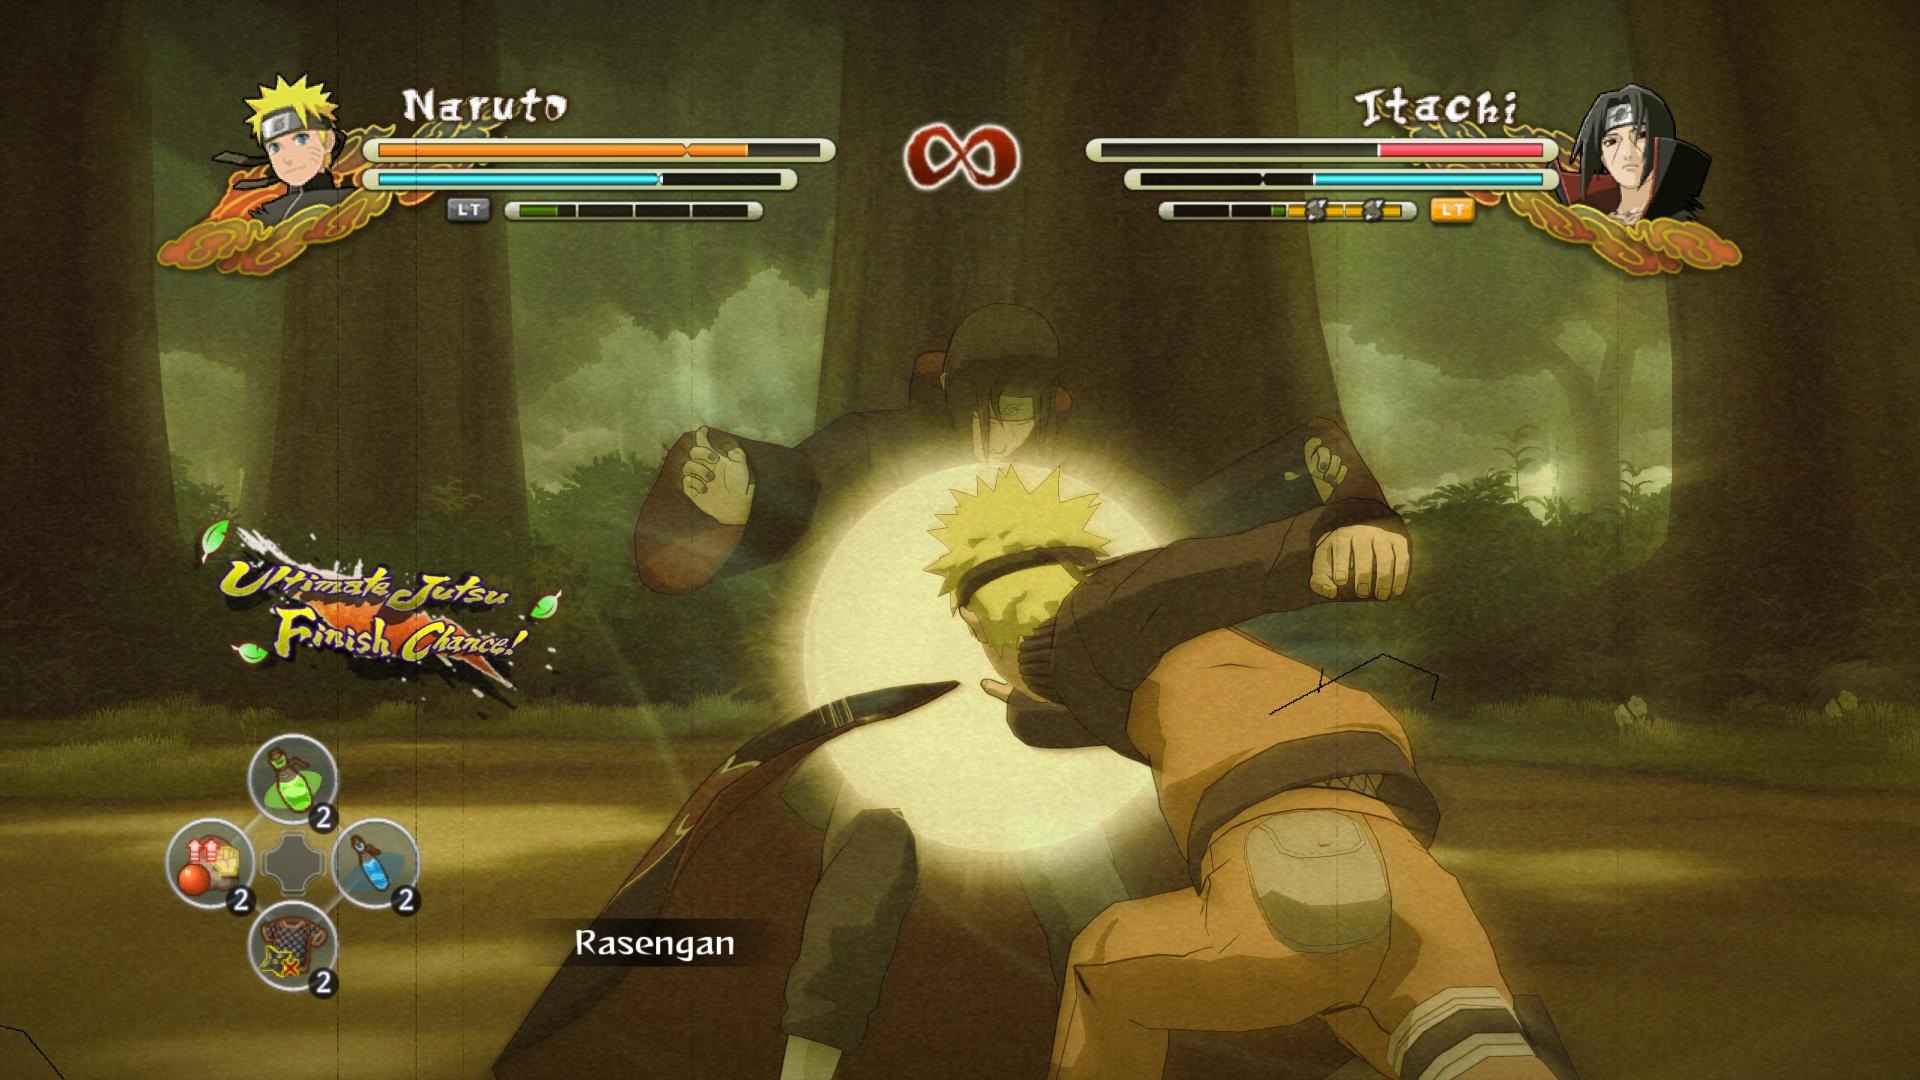 Naruto Shippuden: Ultimate Ninja Storm 3 Full Burst HD - PCGamingWiki PCGW  - bugs, fixes, crashes, mods, guides and improvements for every PC game